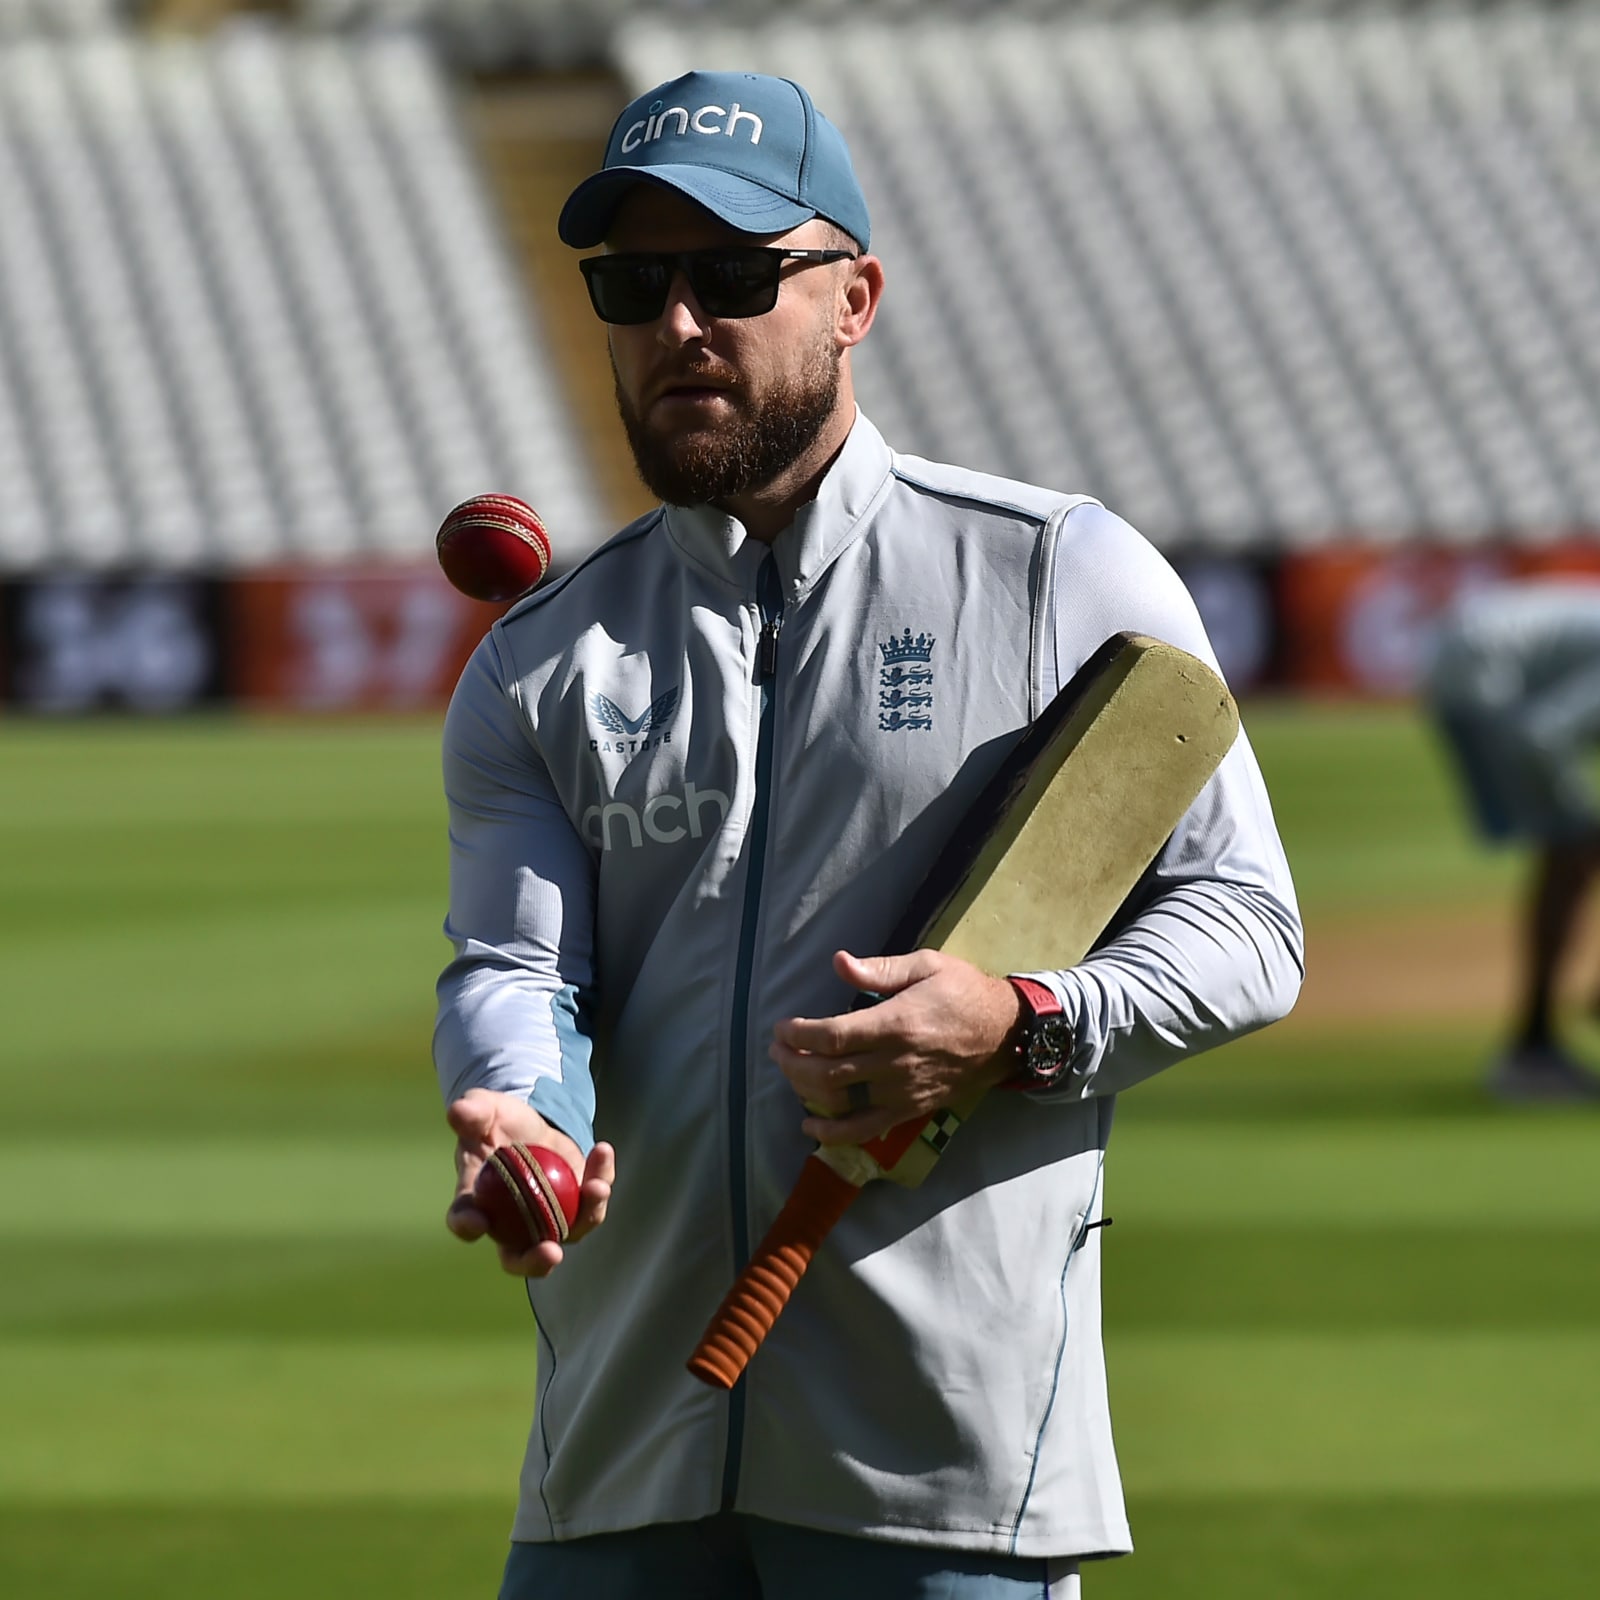 I Don't Really Like That Silly Term': England Test Coach Brendon McCullum  Not a Fan of 'Bazball'